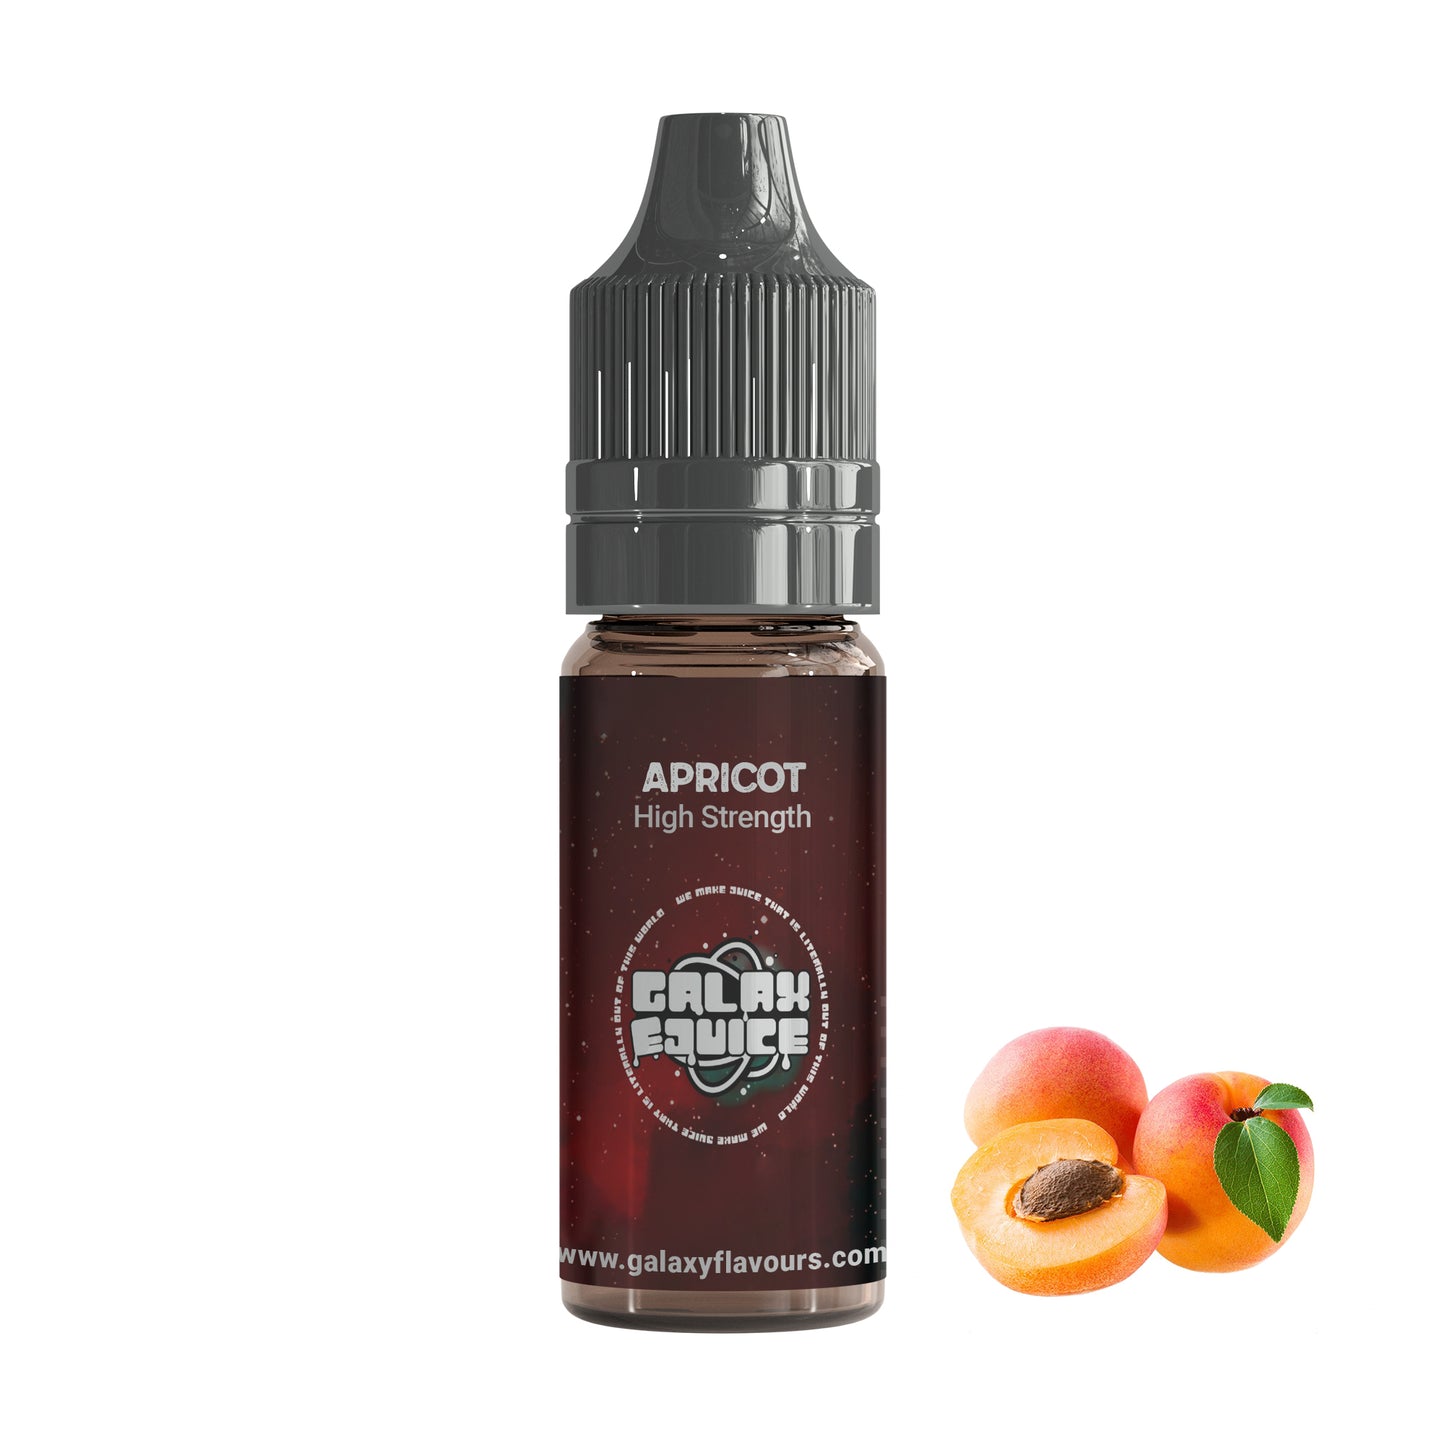 Apricot High Strength Professional Flavouring.